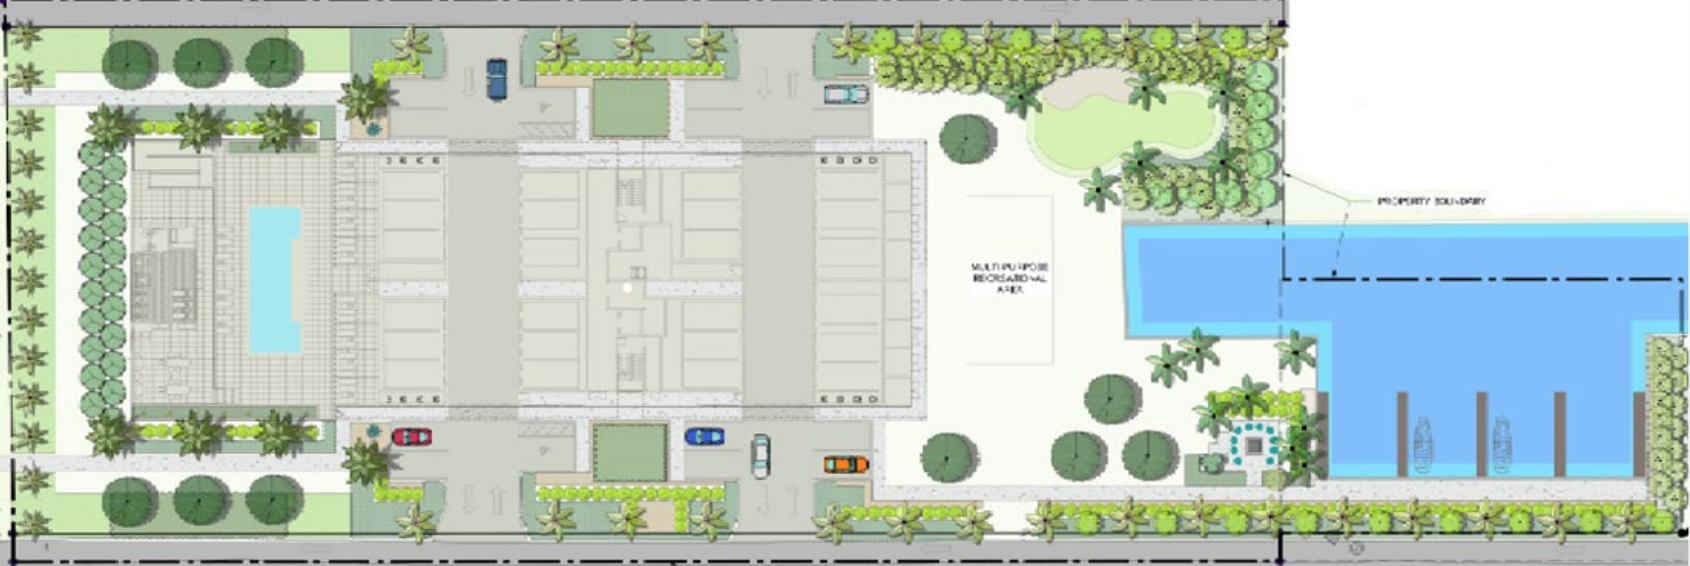 The proposed site includes plans for significant landscaping. (Courtesy photo)